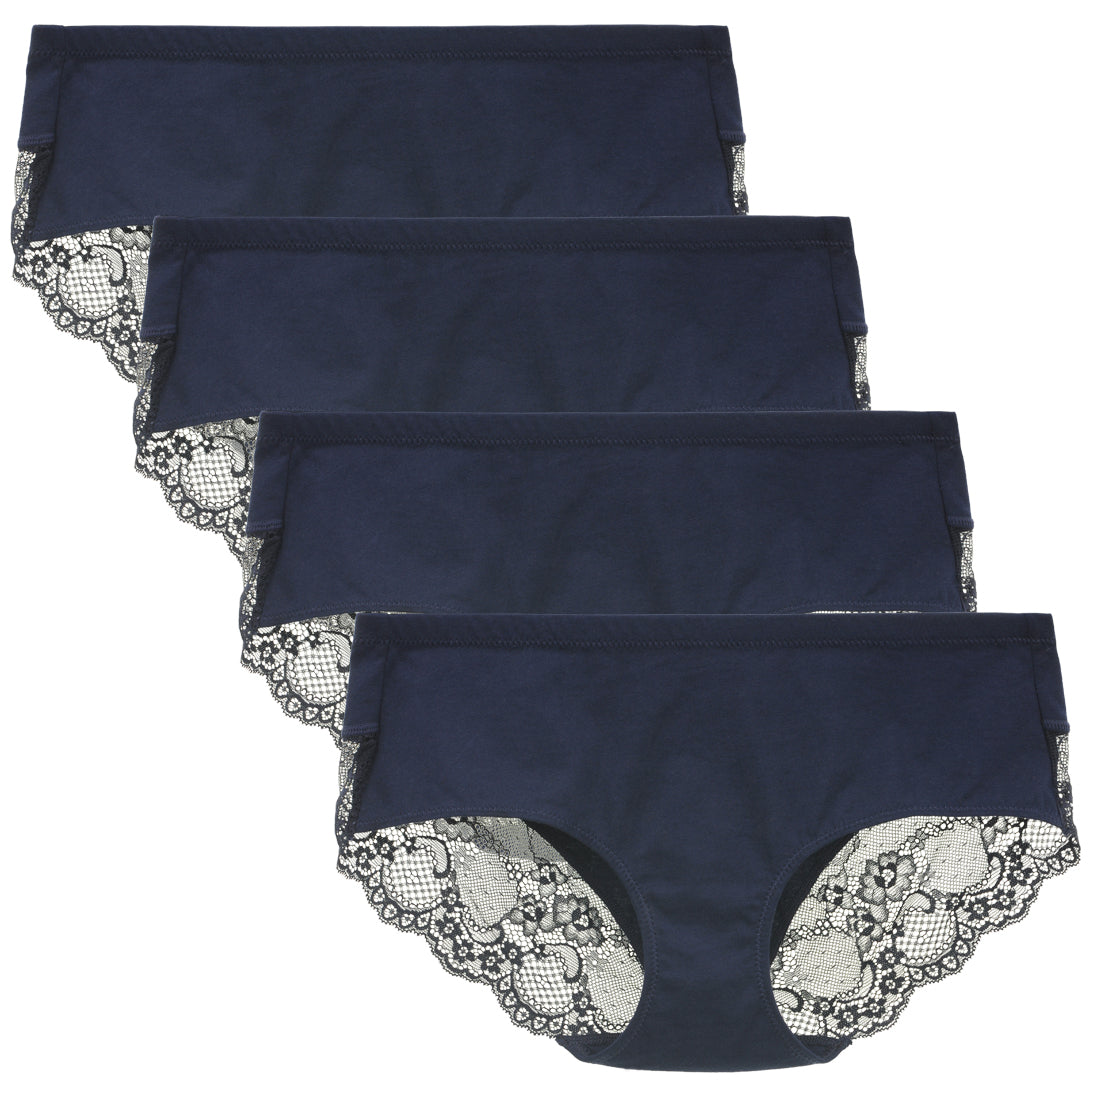 Women's LIVY Panties and underwear from $71